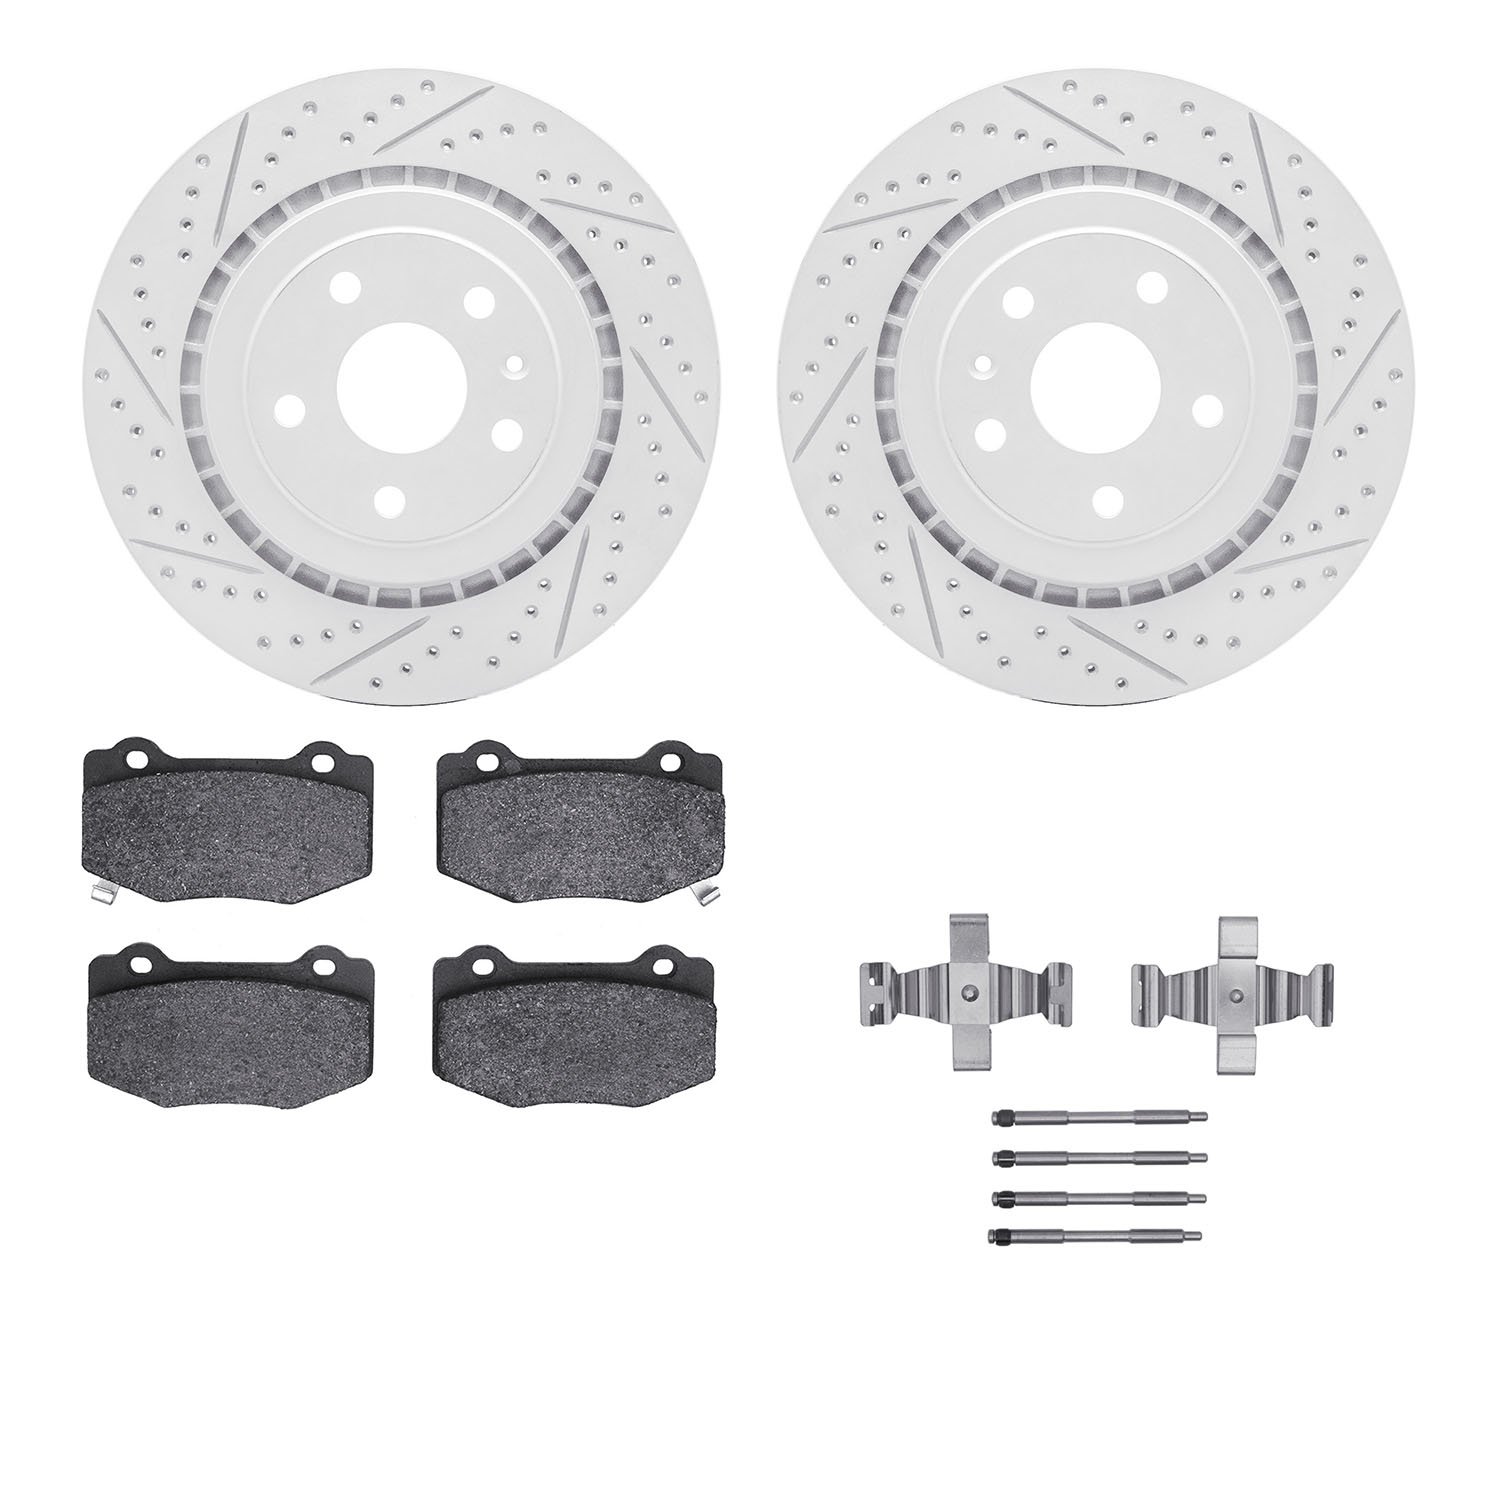 2512-47041 Geoperformance Drilled/Slotted Rotors w/5000 Advanced Brake Pads Kit & Hardware, Fits Select GM, Position: Rear